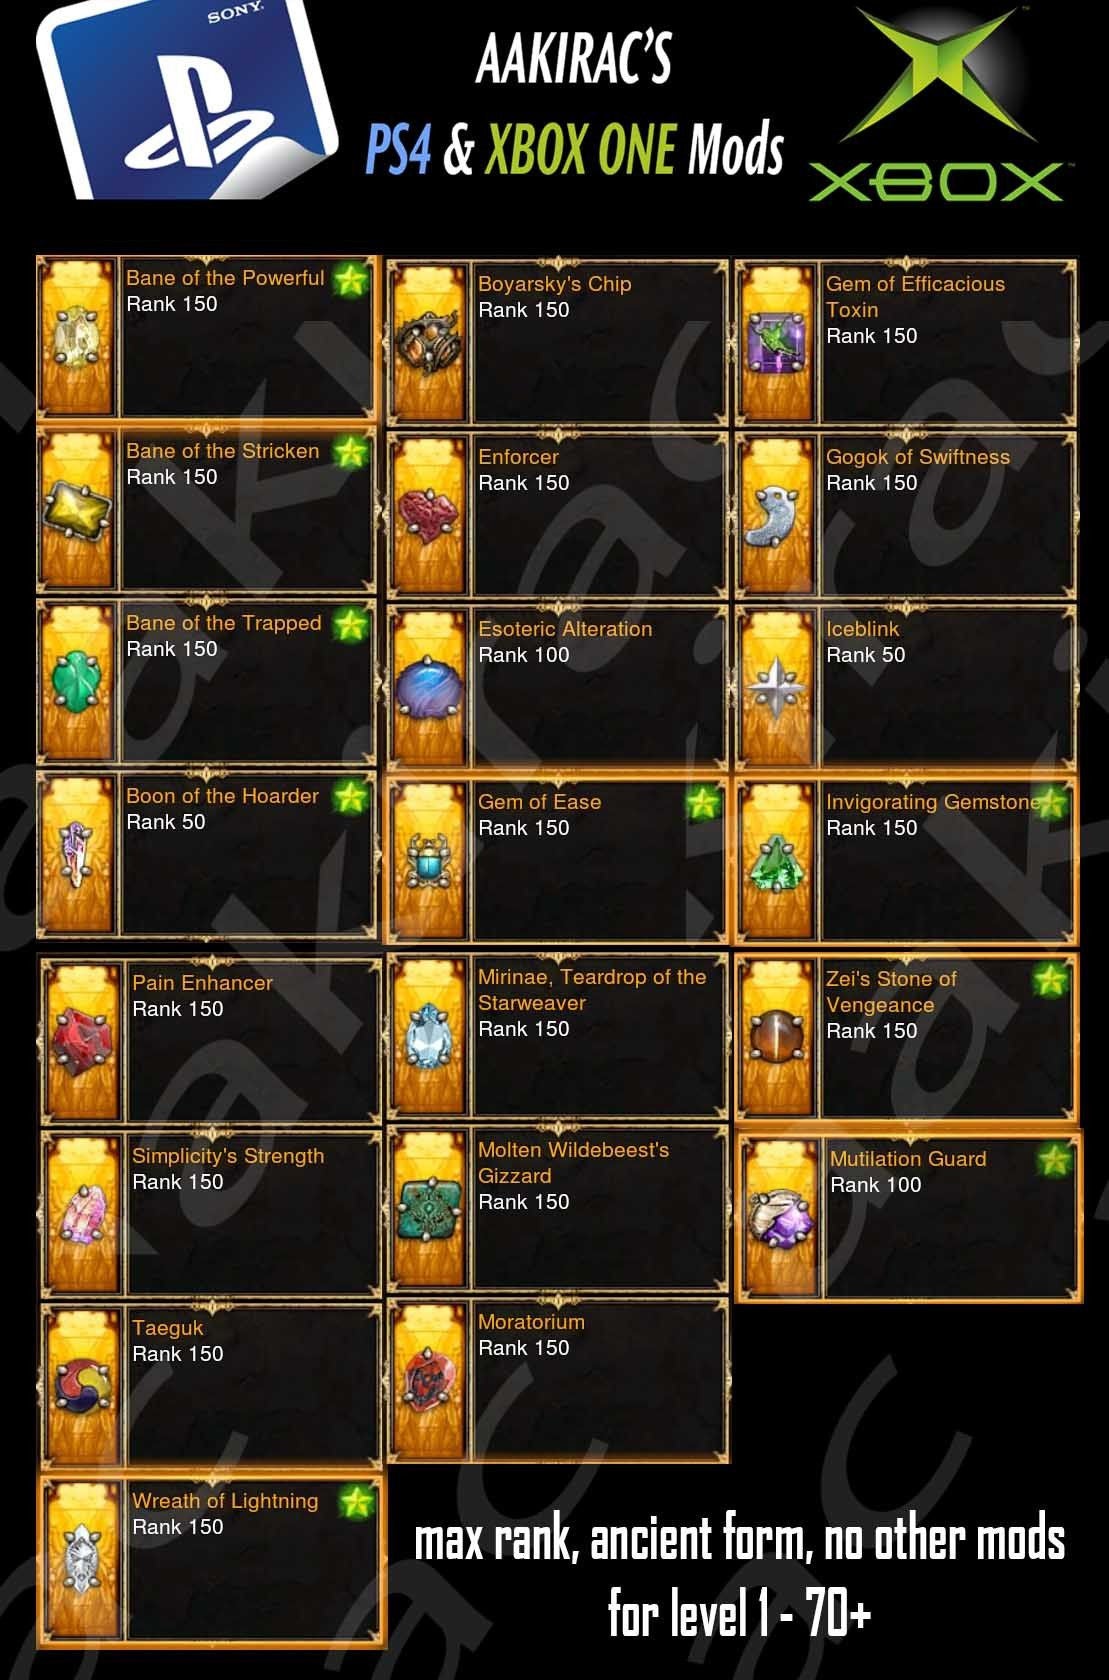 Seasonal 21x Legendary Gems (Works at Level 1 , Ancient, Max Rank, Unmodded) Diablo 3 Mods ROS Seasonal and Non Seasonal Save Mod - Modded Items and Gear - Hacks - Cheats - Trainers for Playstation 4 - Playstation 5 - Nintendo Switch - Xbox One